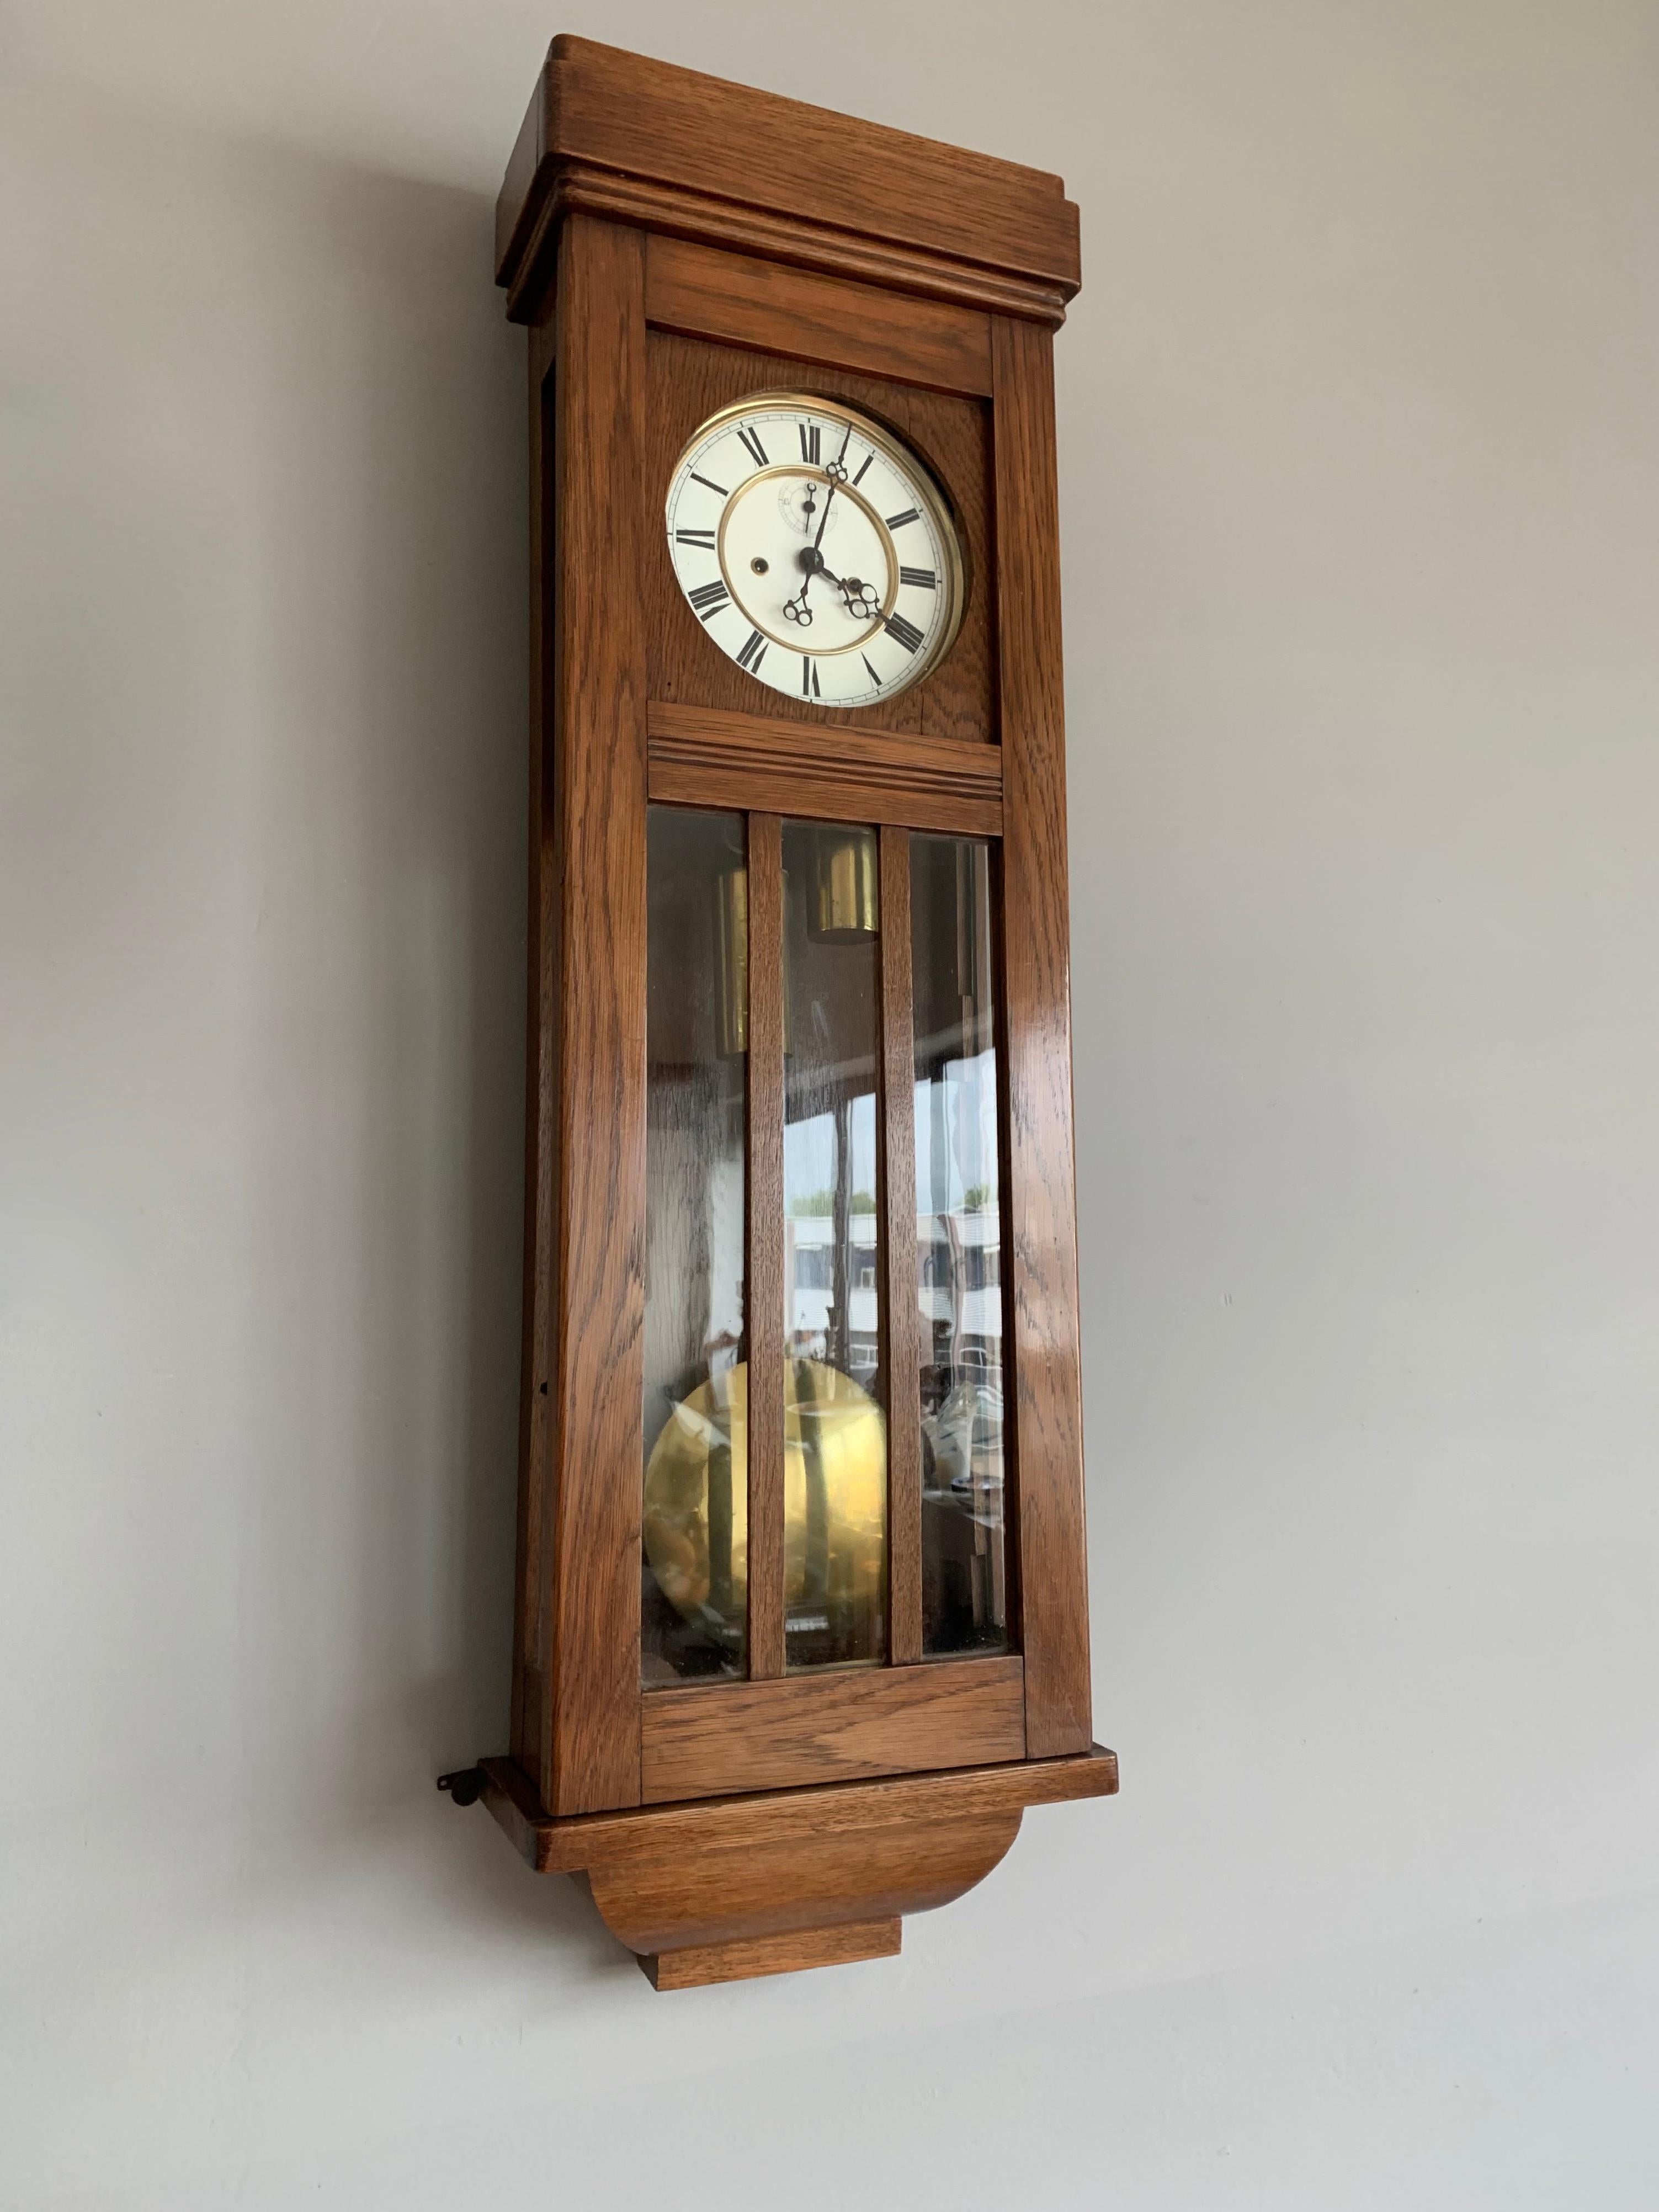 Early 1900s Viennese regulator, two weight wall clock in a handcrafted oak and glass case.

If you are looking for a stylish clock then this tall and sleek antique could be gracing the wall of your home or office space soon. All handcrafted in the